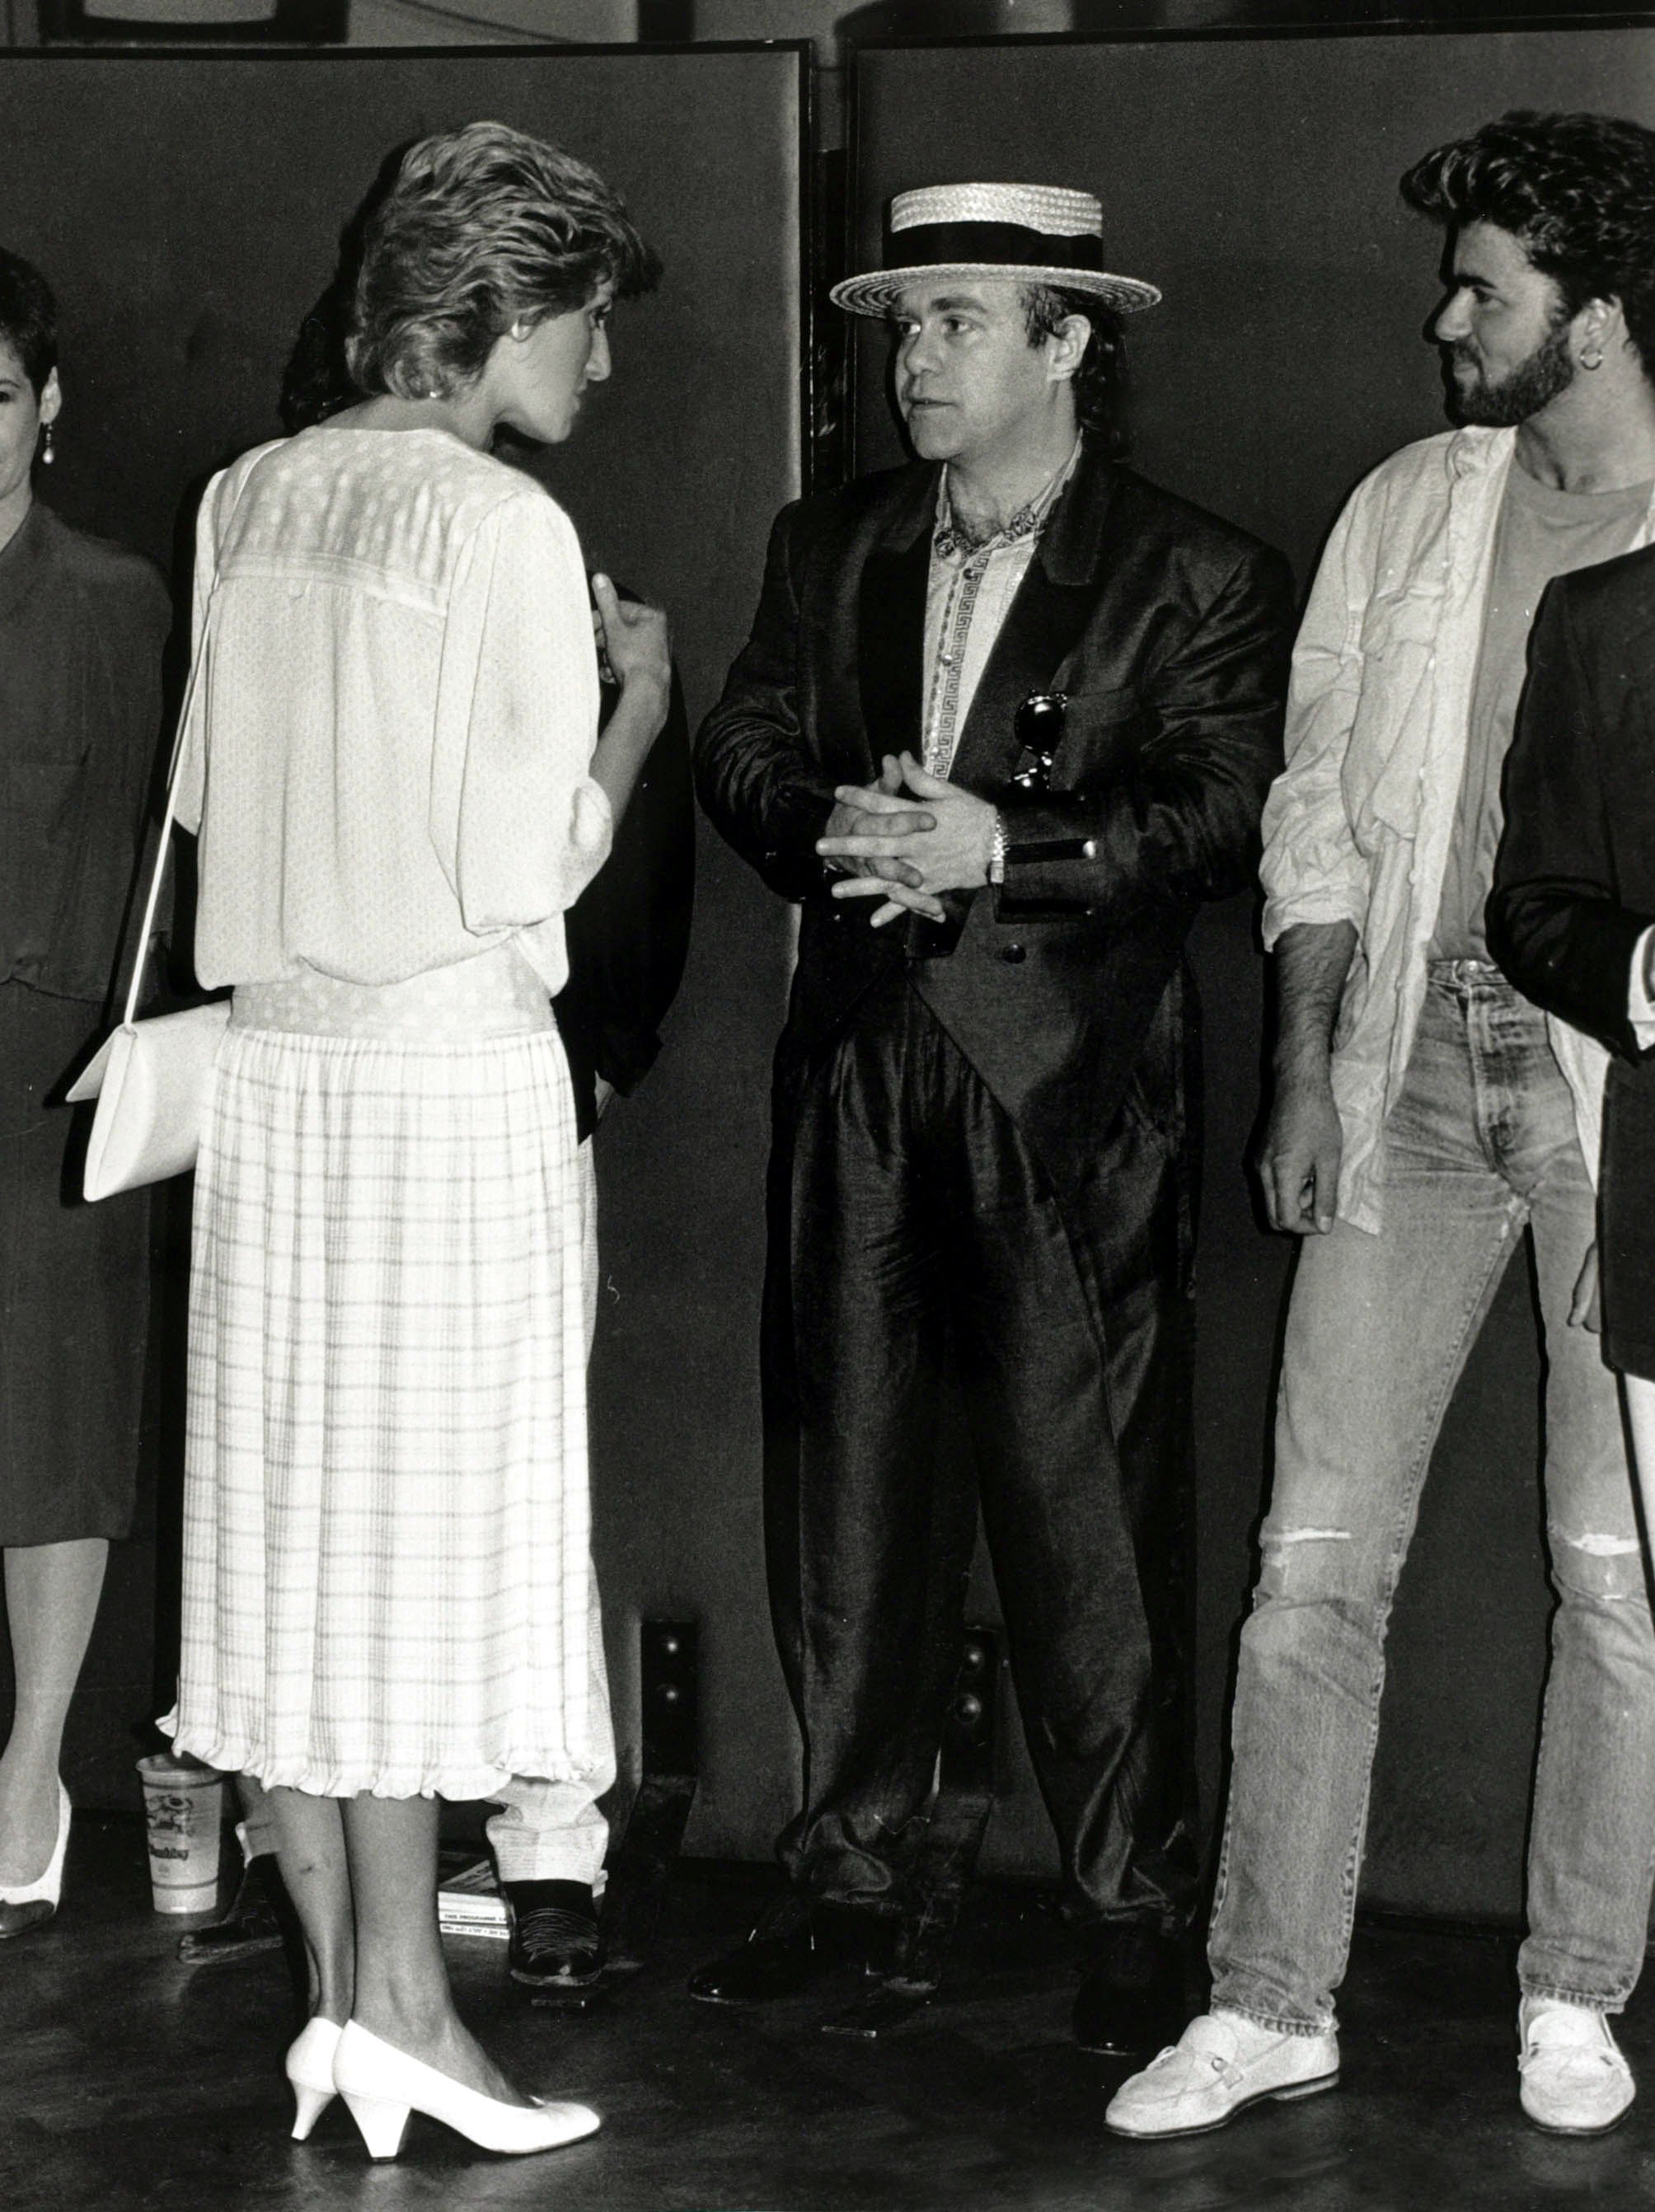 Diana, Princess of Wales pictured chatting to musicians Elton John and George Michael at the "Feed the World" Live Aid concert on13th July 1985, at Wembley | Source: Getty Images